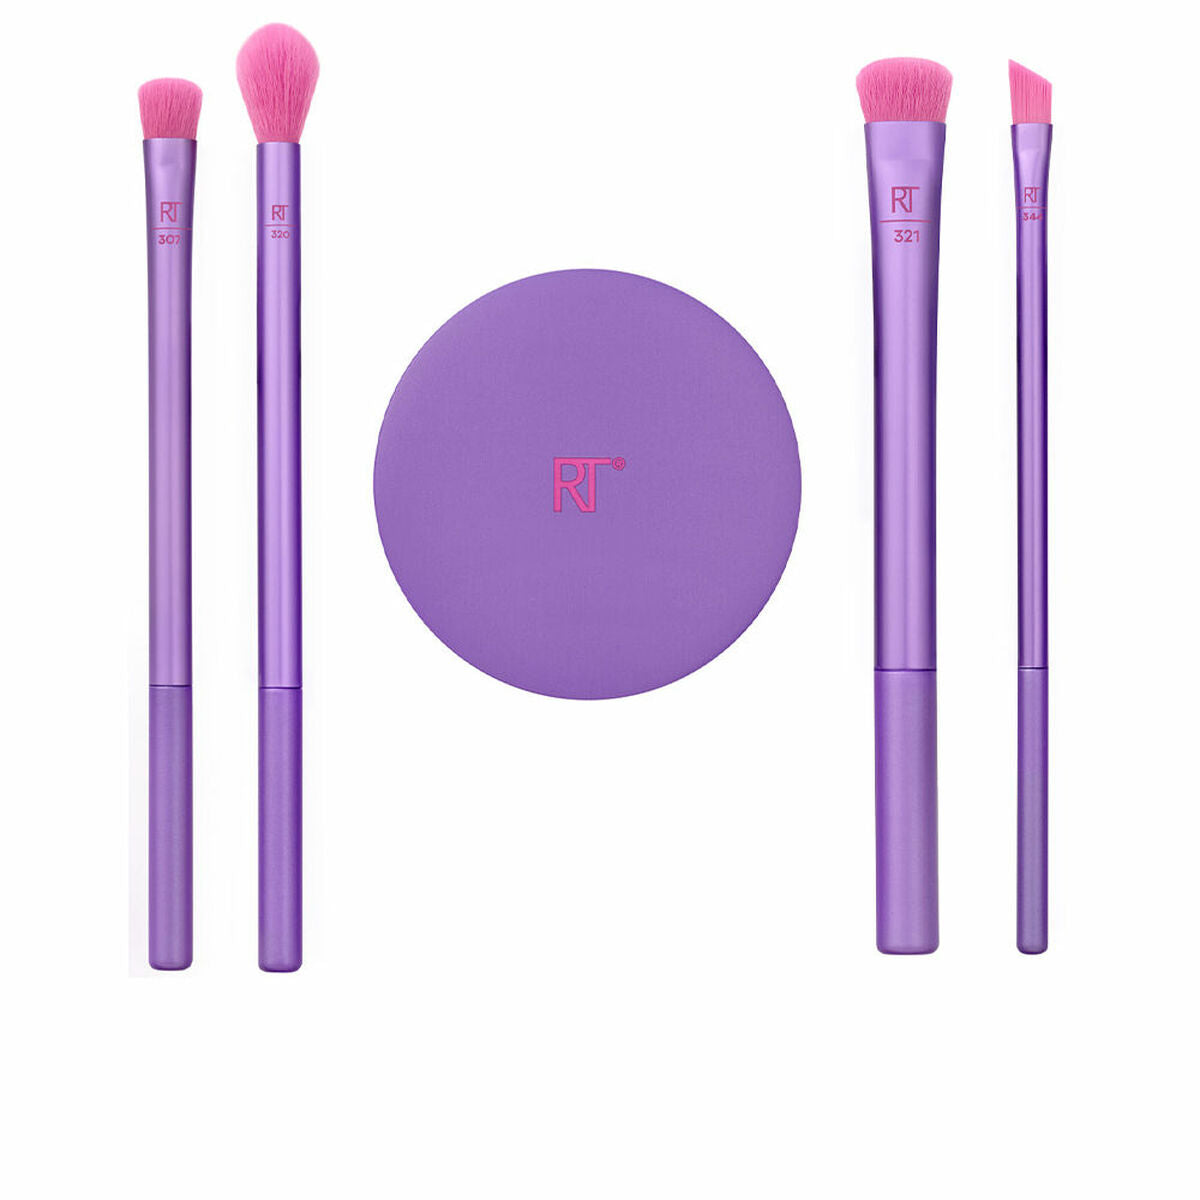 Set of Make-up Brushes Real Techniques Brow Styling Fuchsia 5 Pieces-0